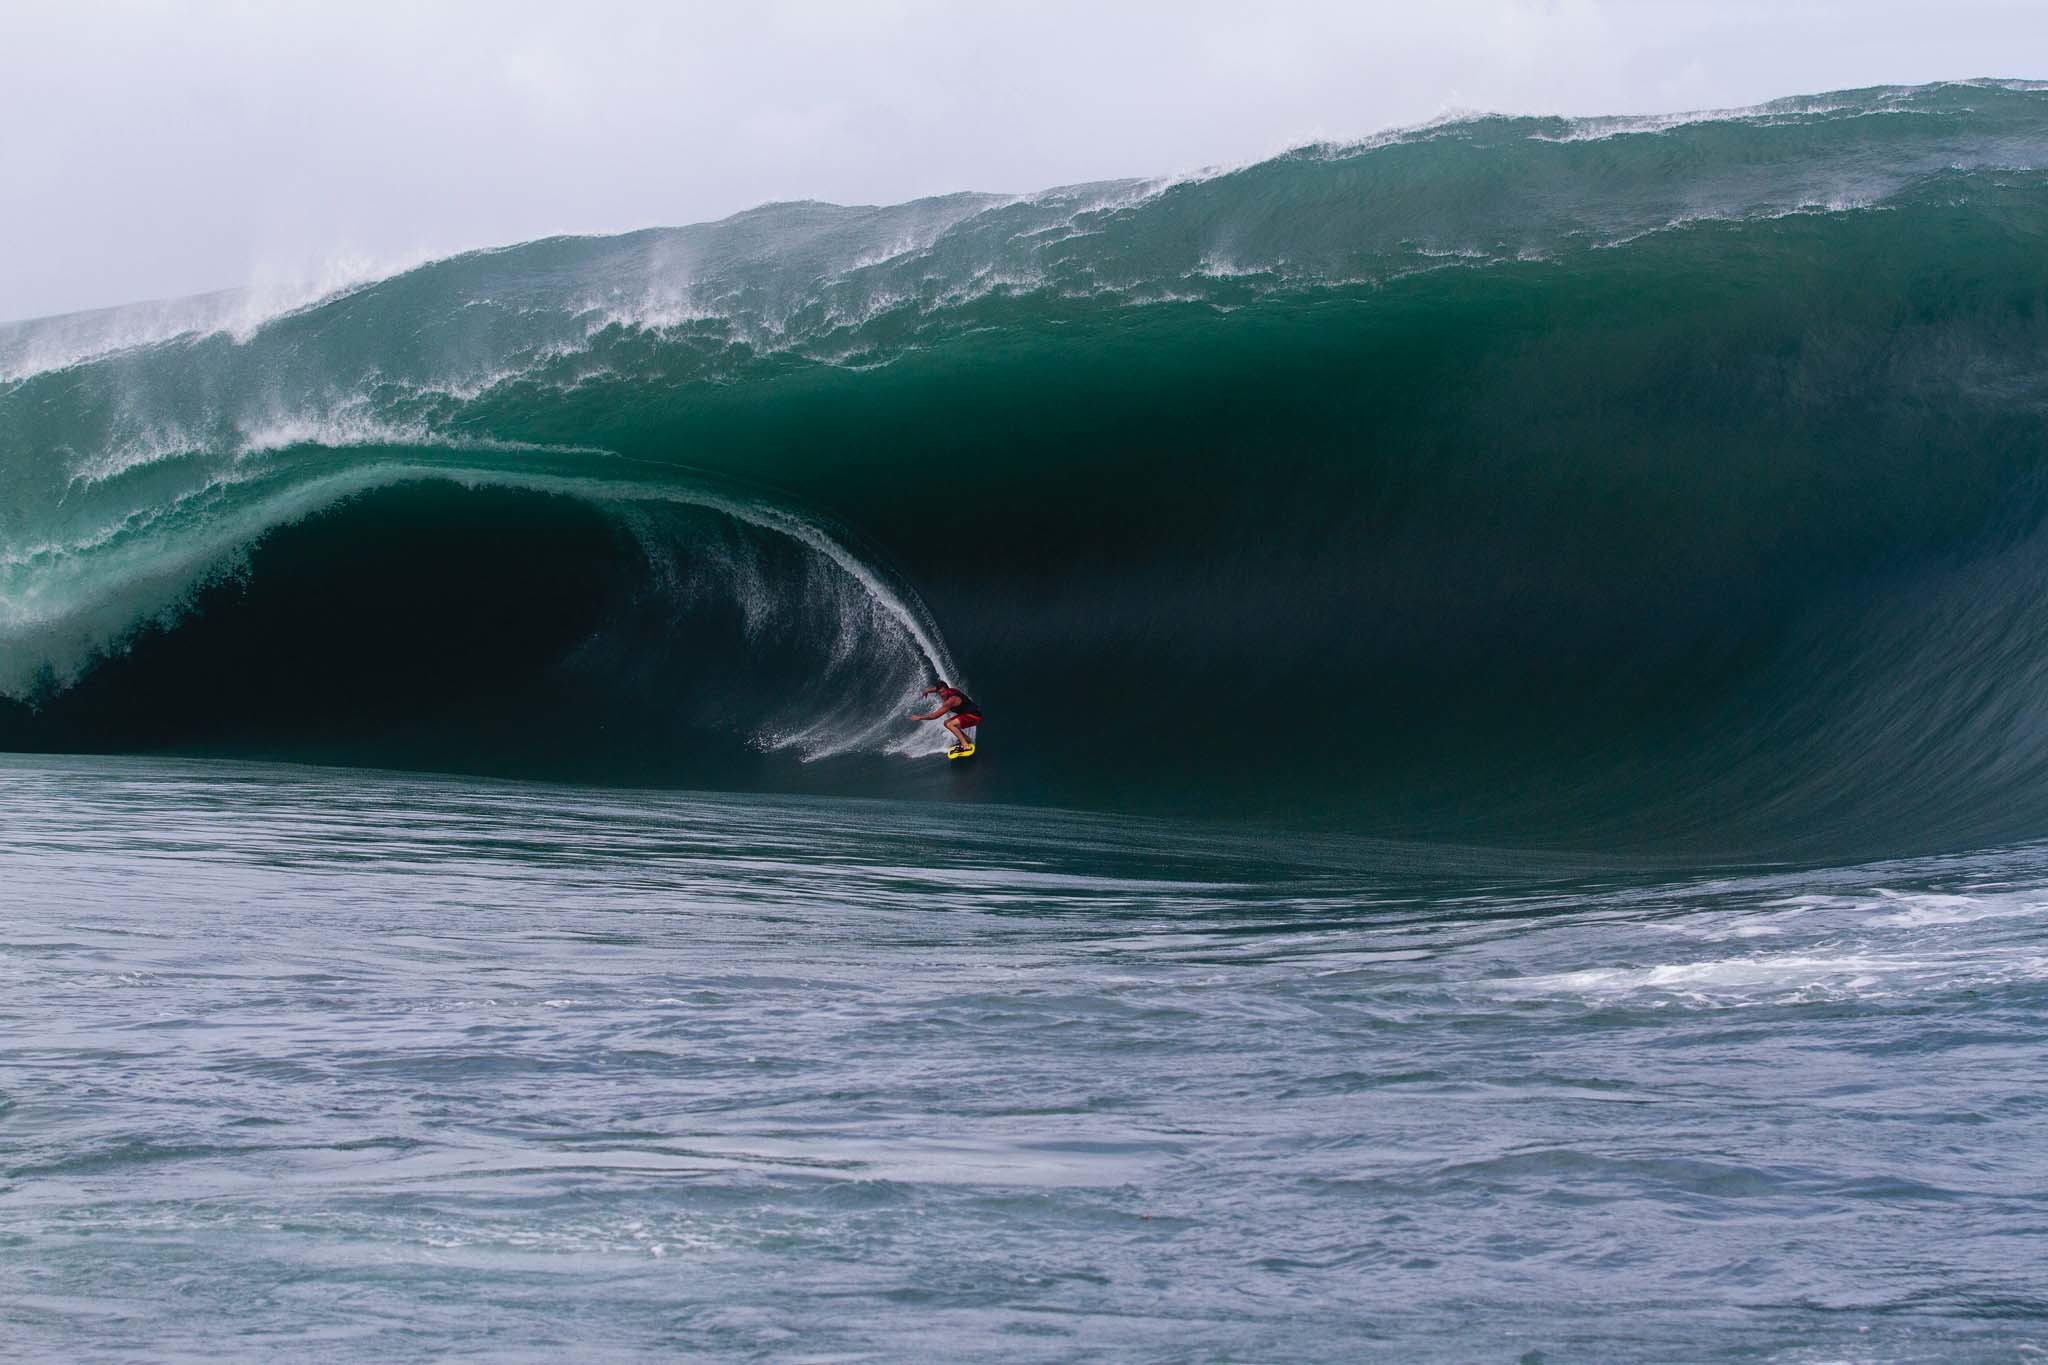 2048x1365 Known as "the heaviest wave in the world", Teahupoo (cho-poo